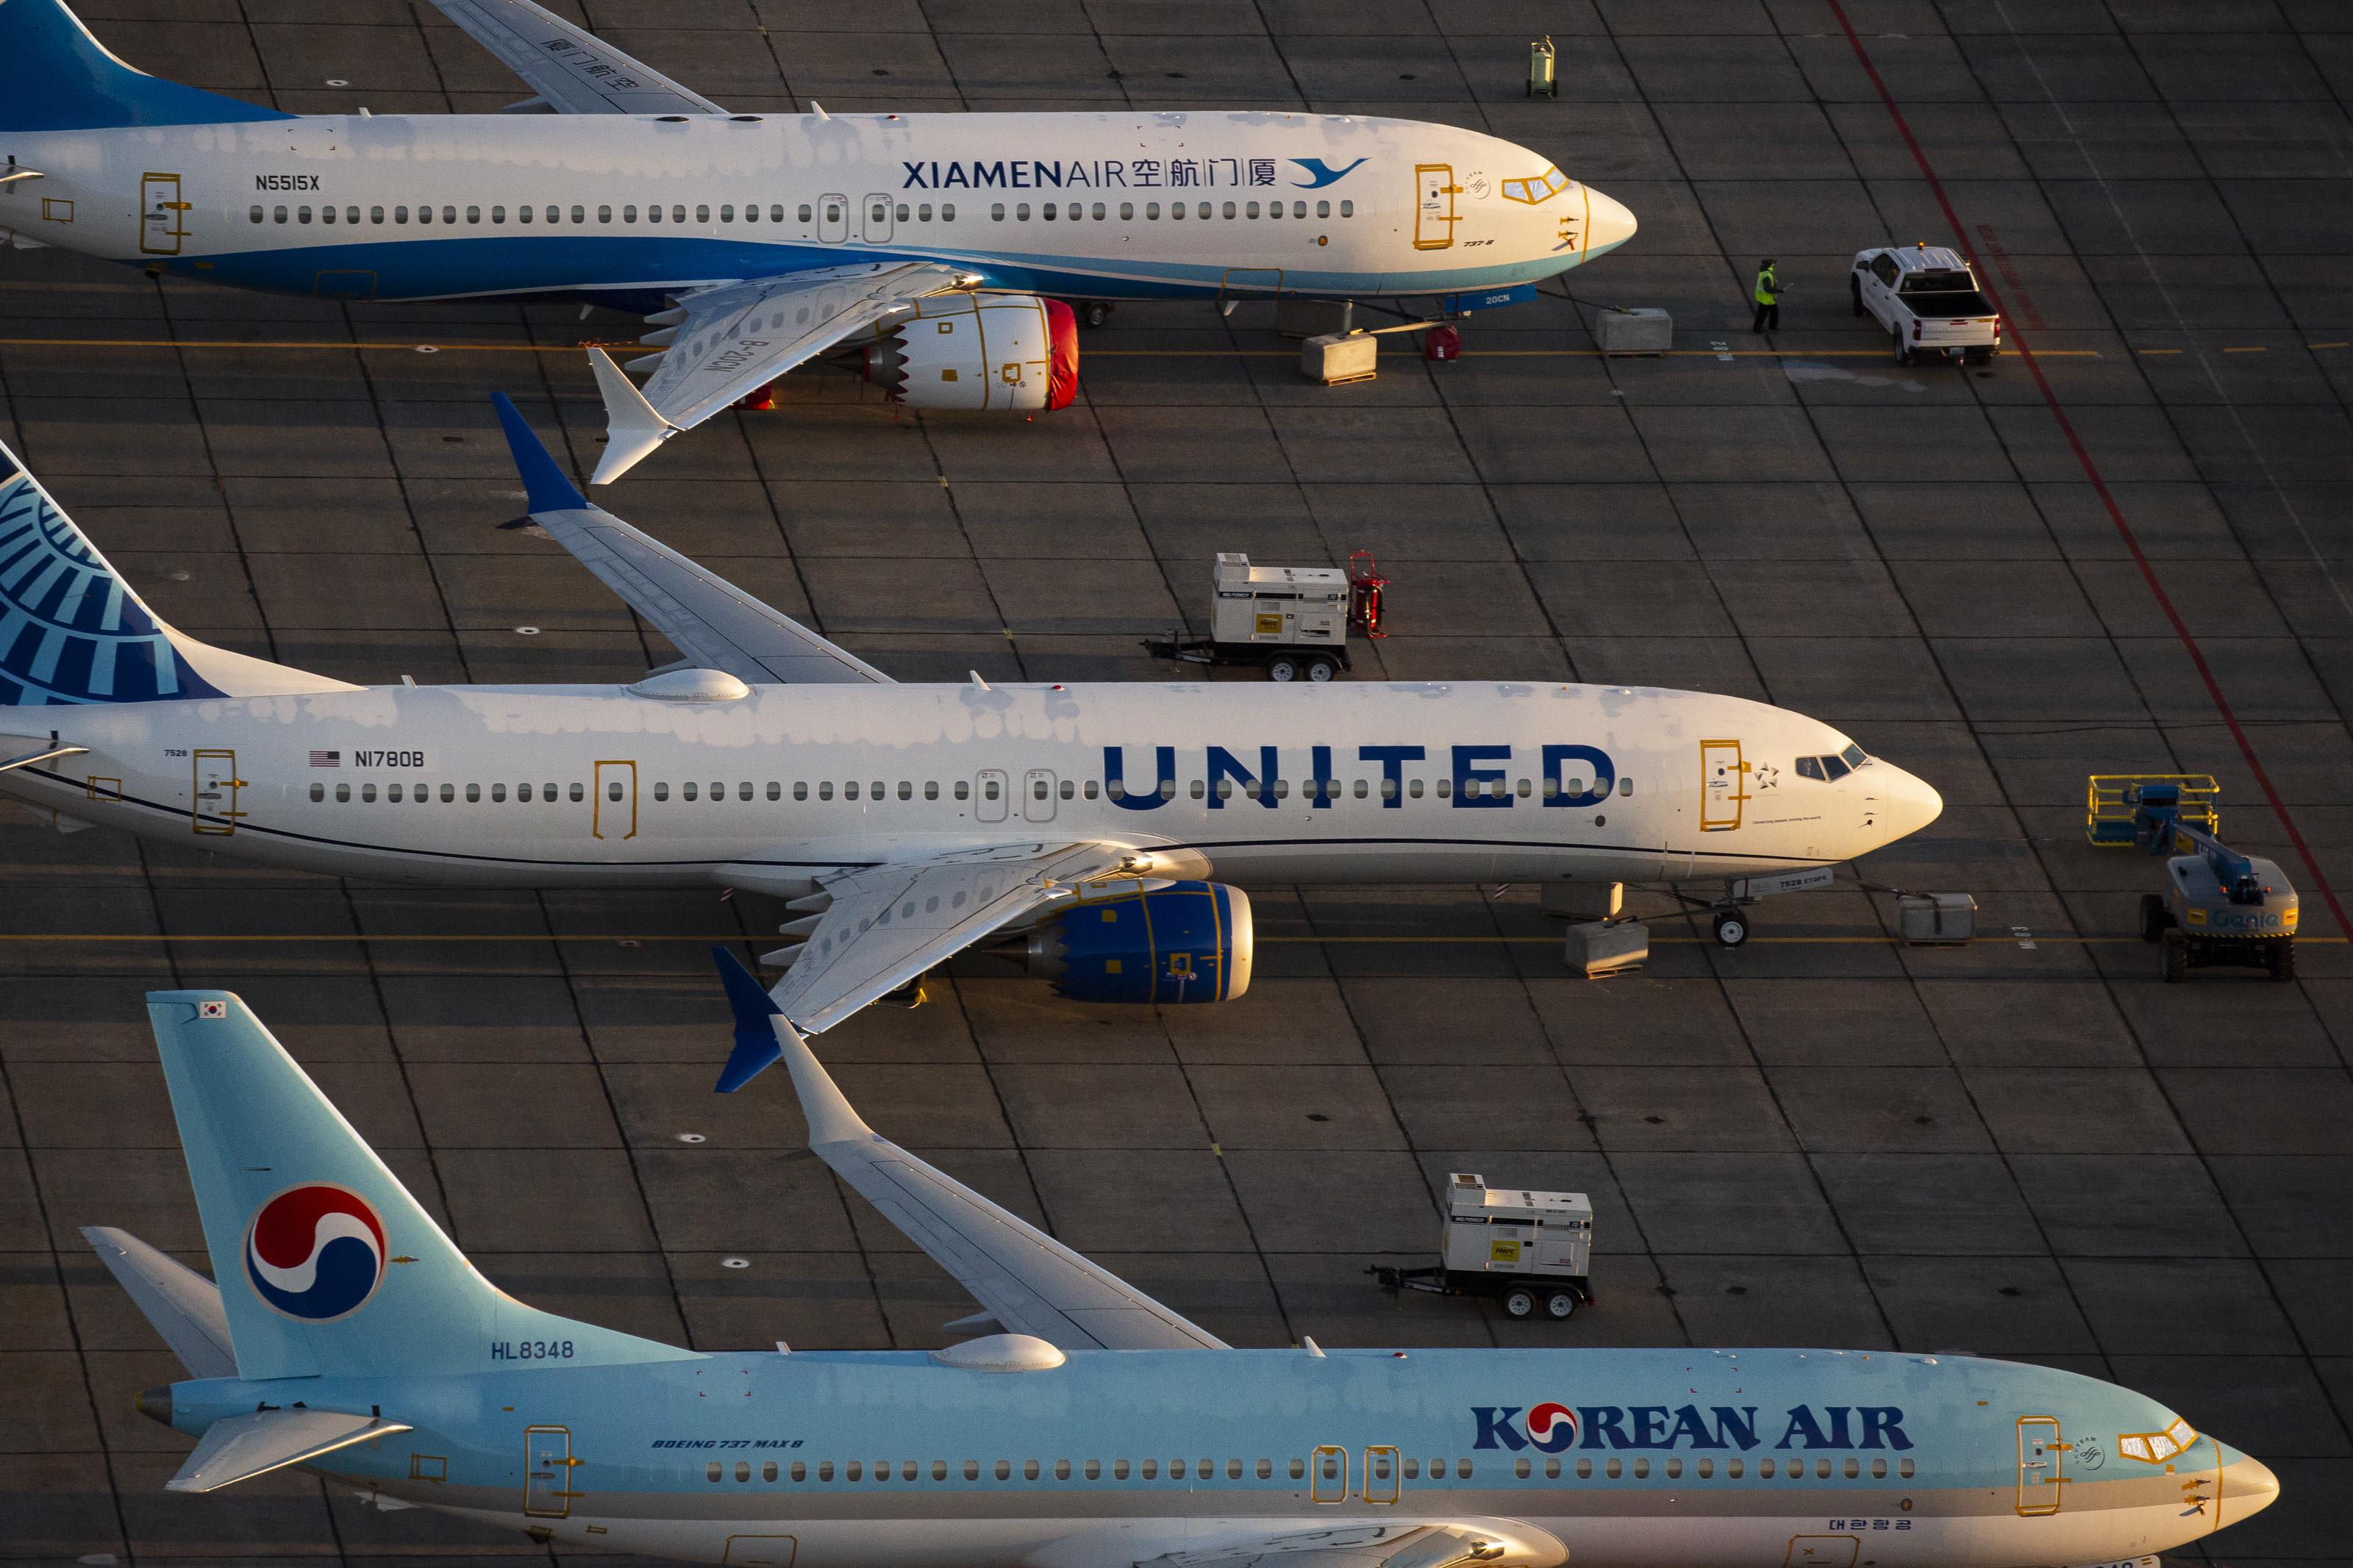 Three Boeing 737 Max airplanes are parked side by side on the tarmac.